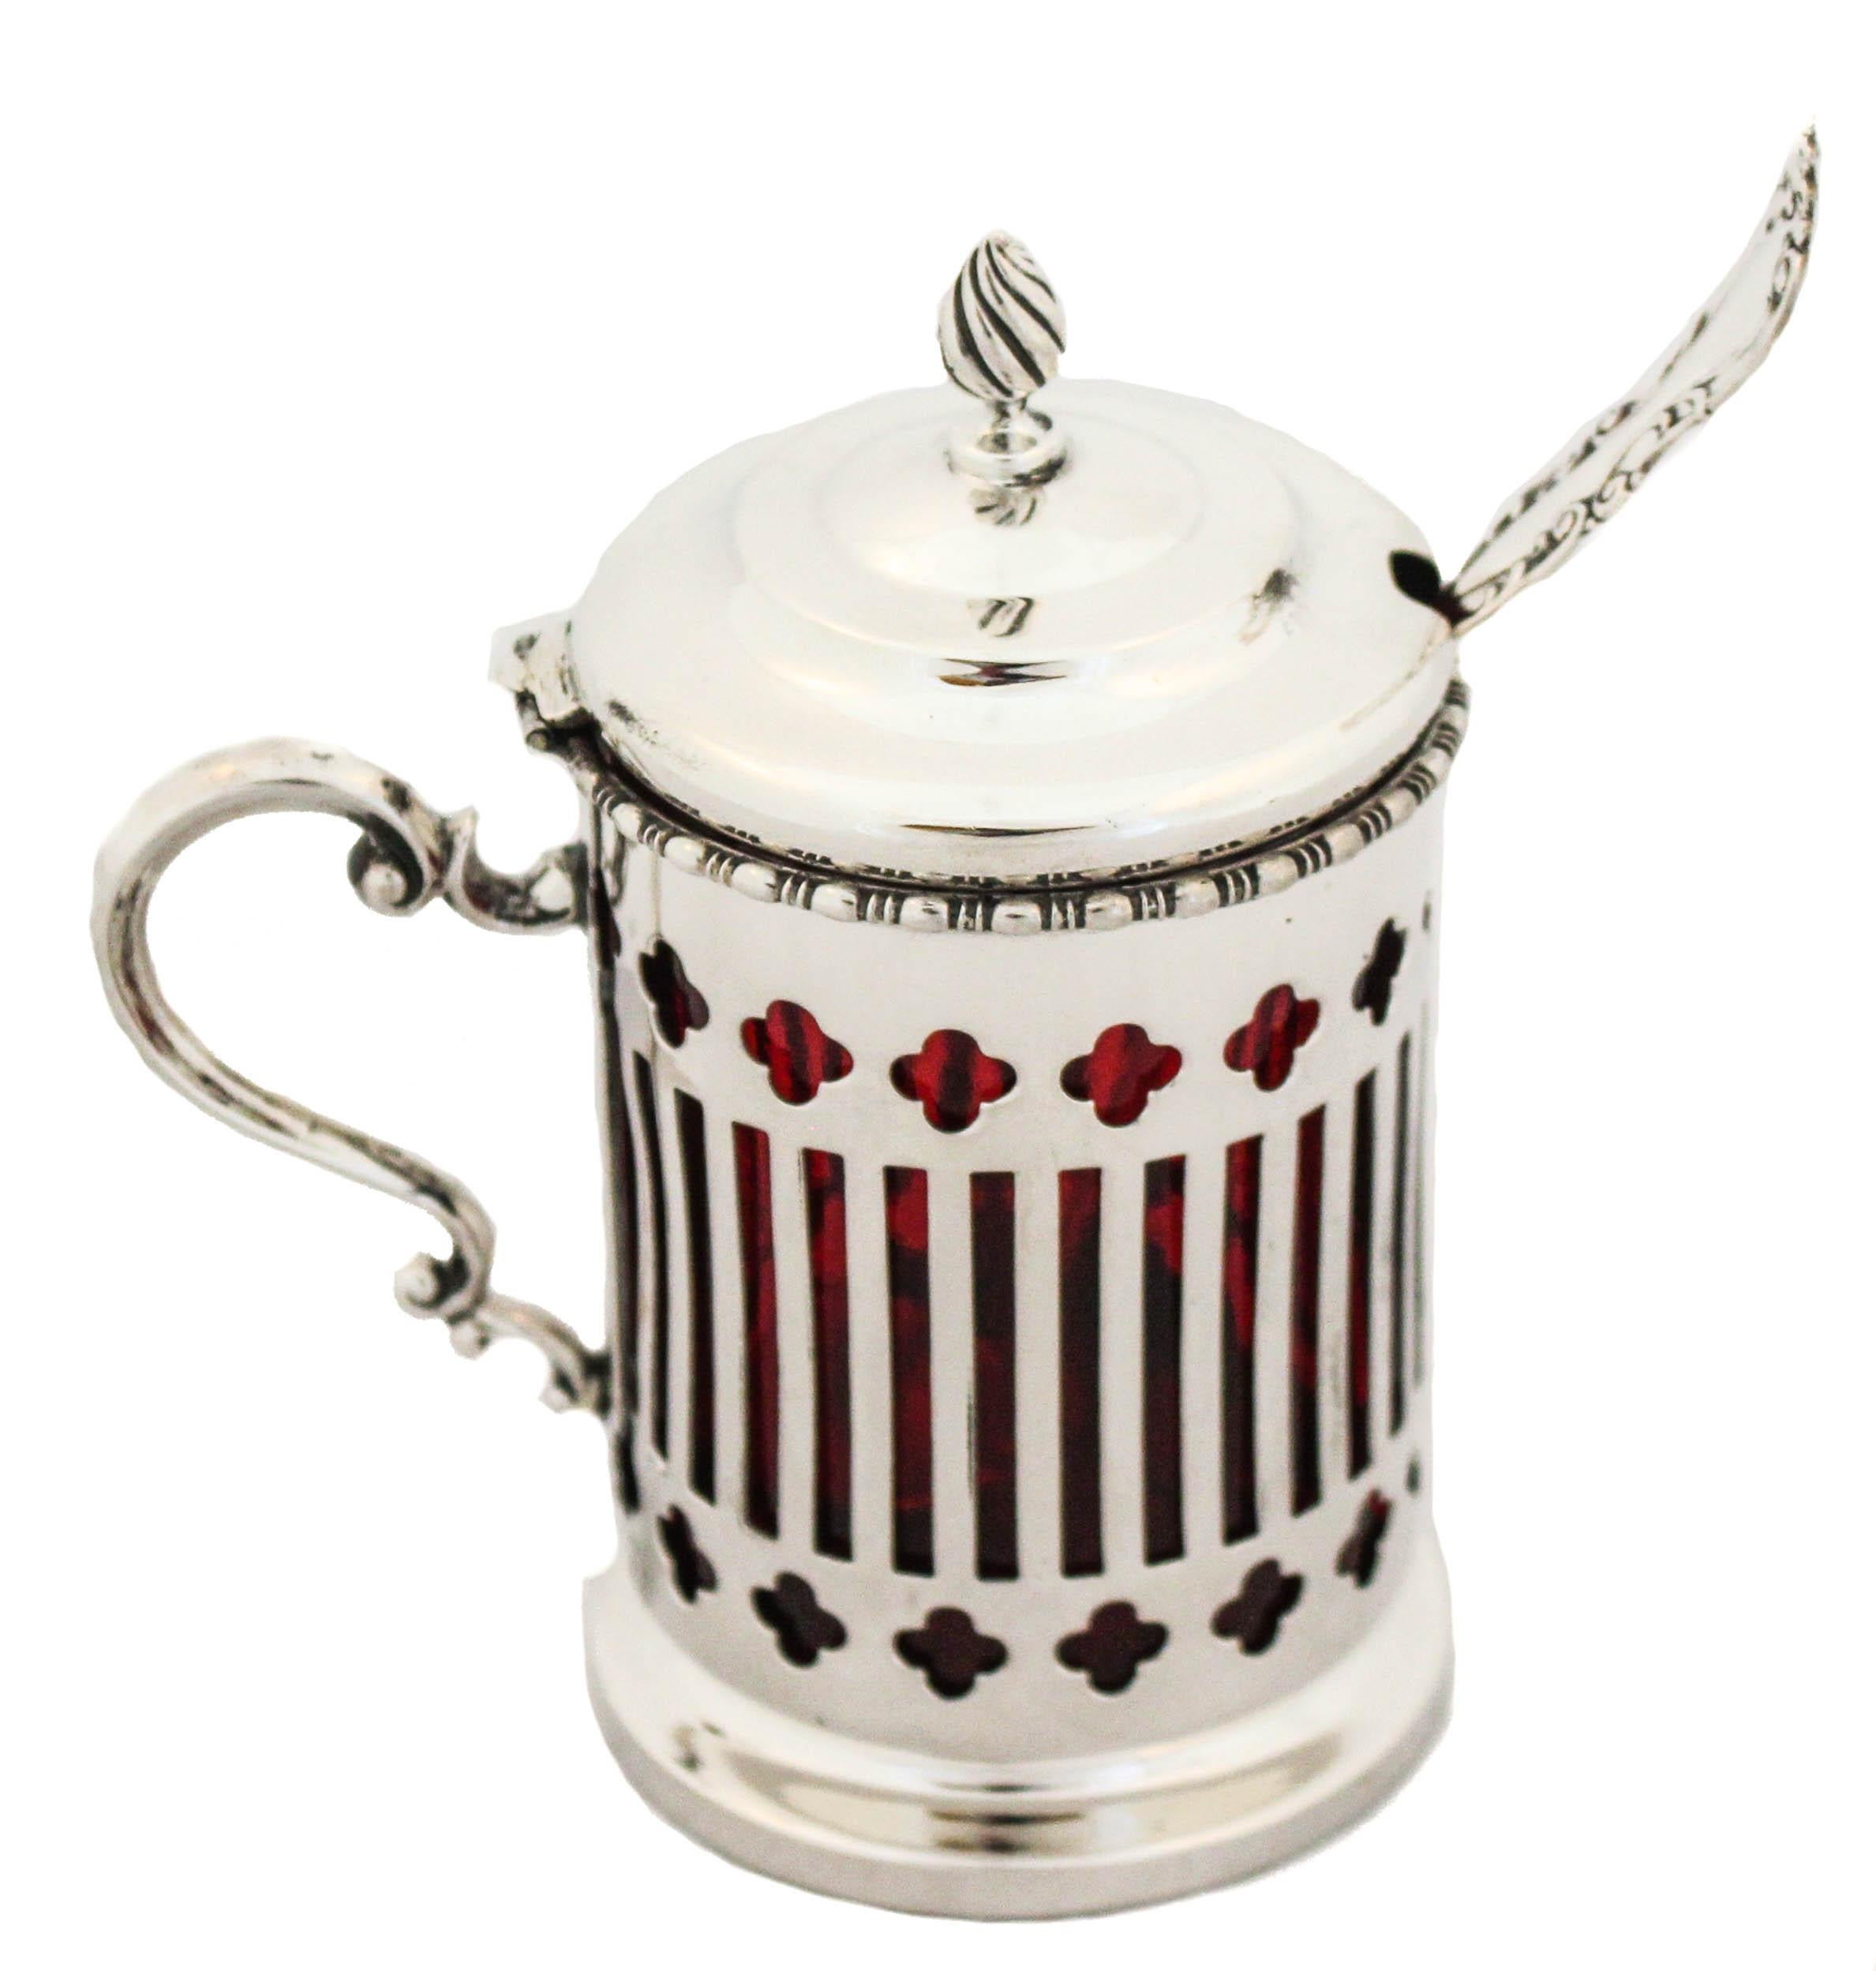 This rare sterling silver mustard jar and ladle were manufactured by Marcus & Company.  It has a ruby-red glass liner that pops through the reticulated pattern.  The glass is removable so it’s super easy to wash and return.  The mustard ladle has a